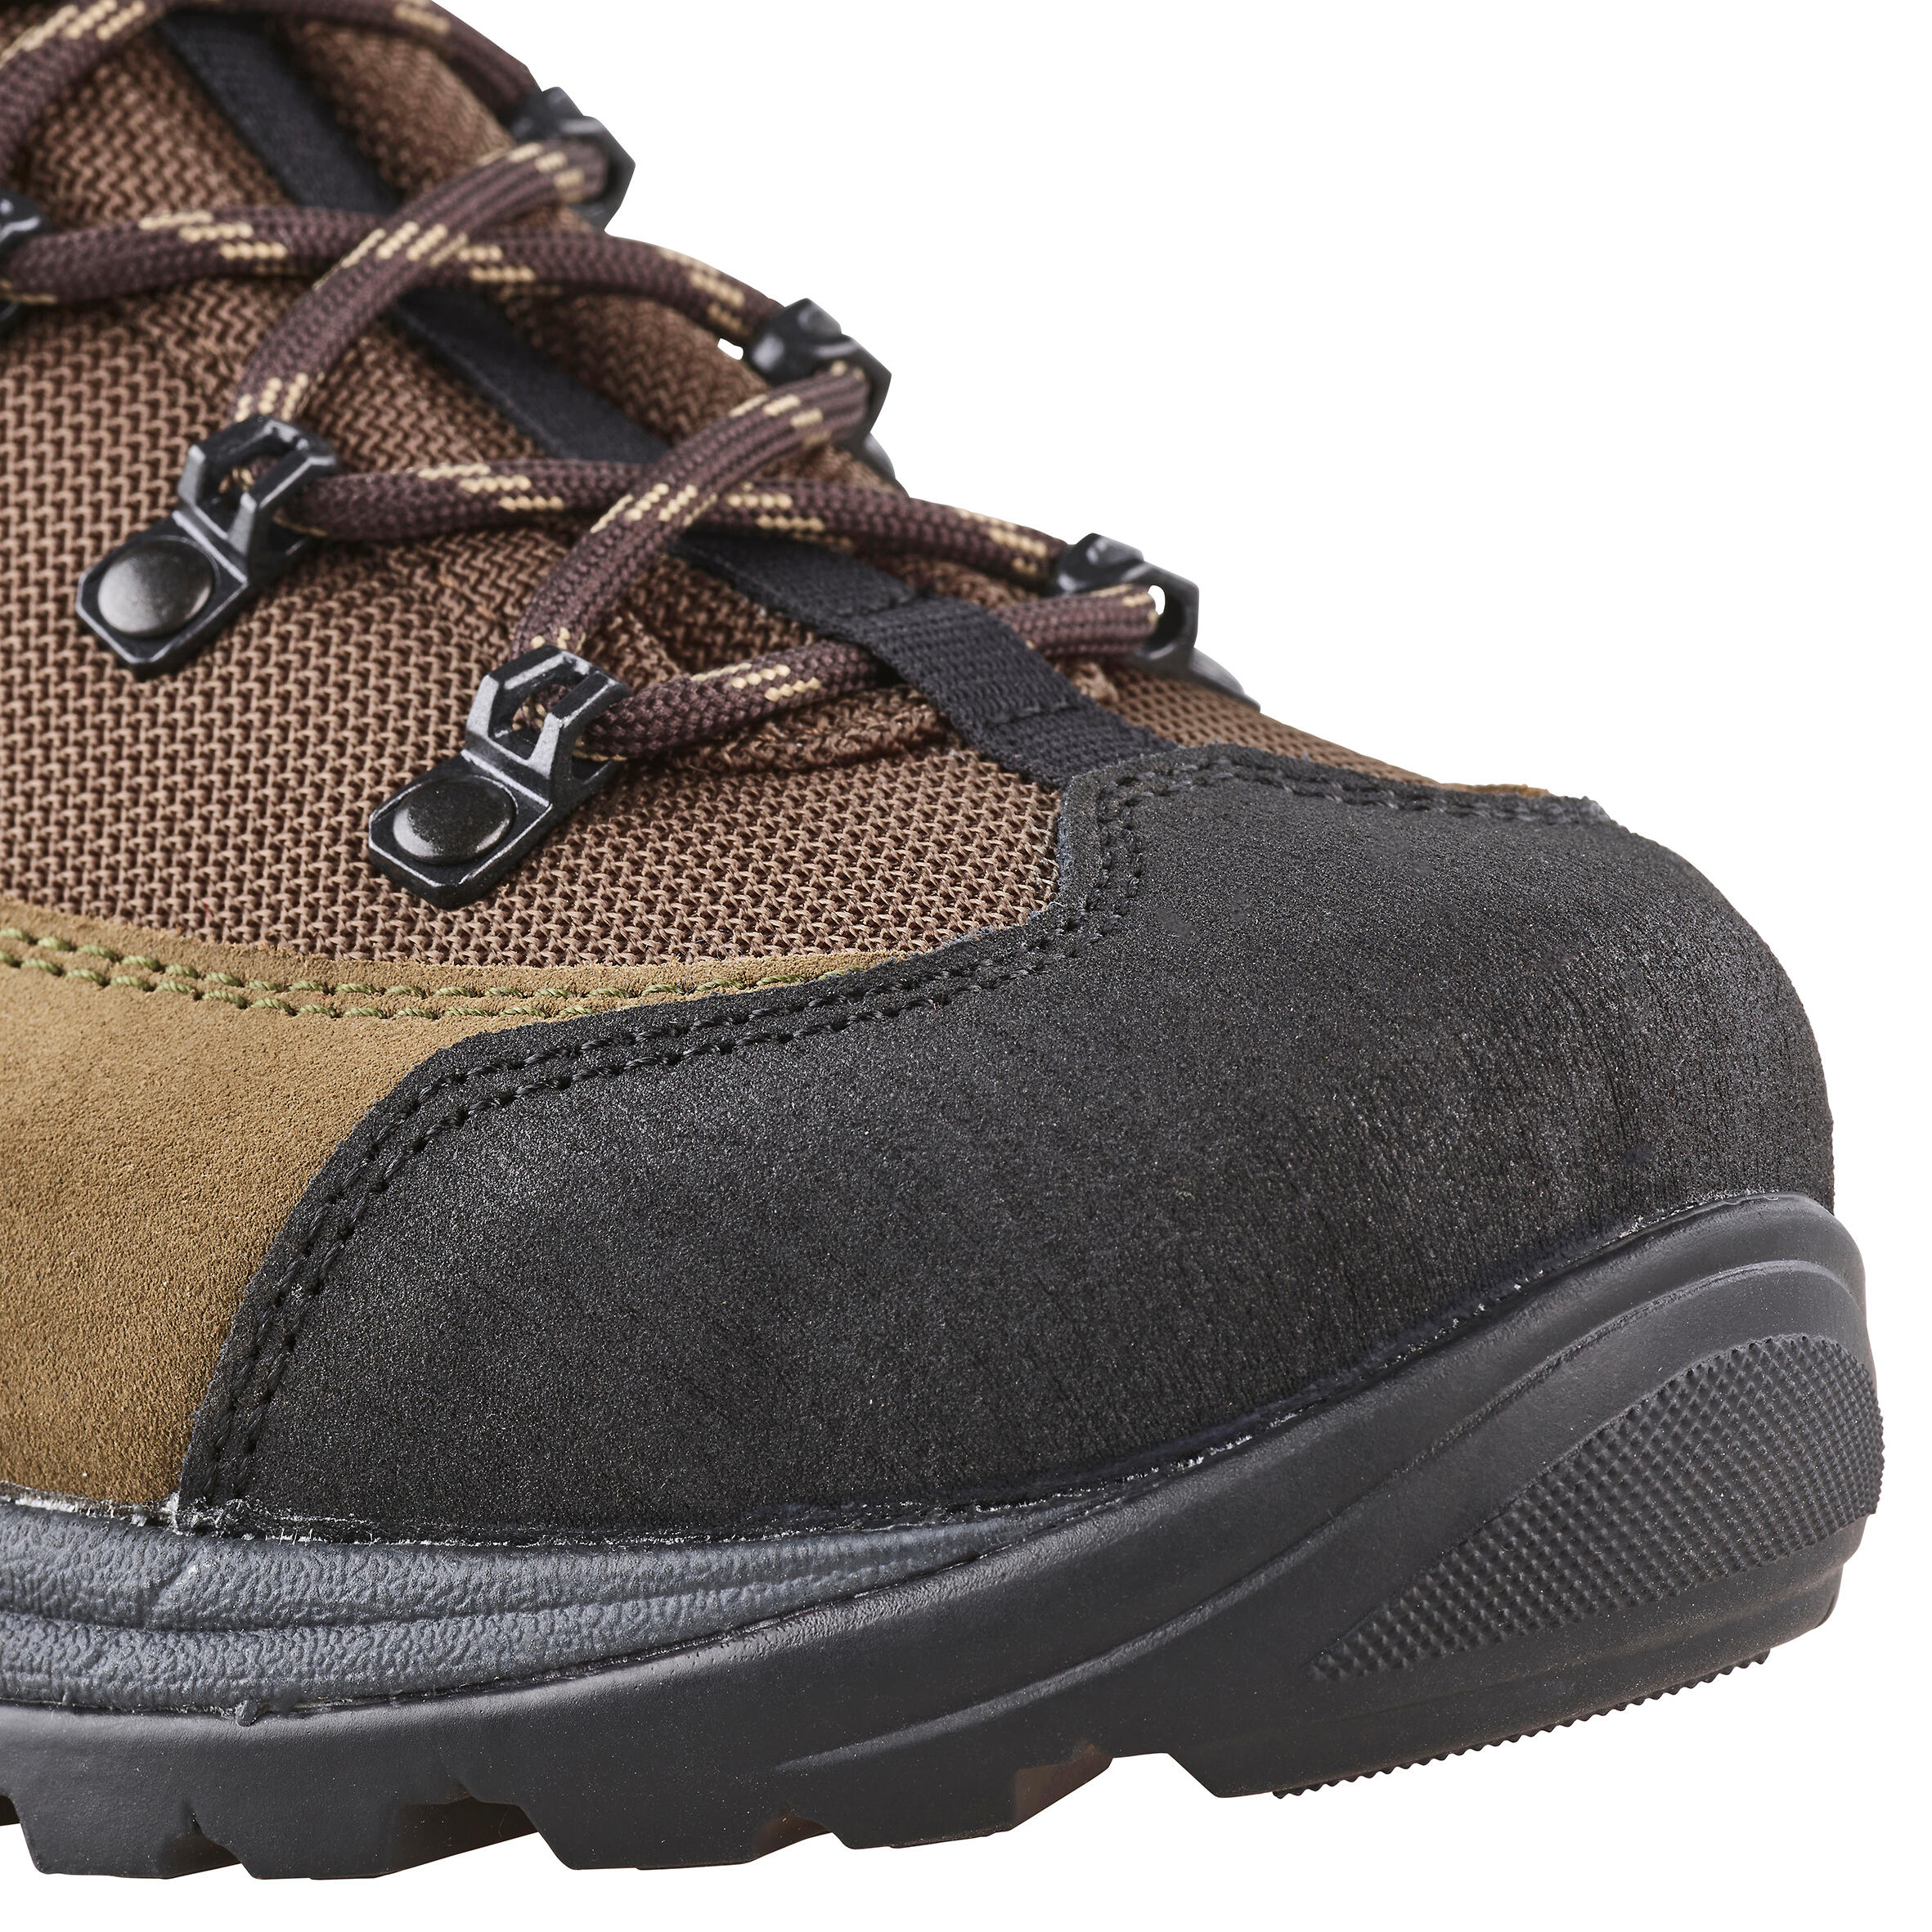 Waterproof Country Sport Boots Asolo X-Hunt Land Gore-Tex Vibram 8/12